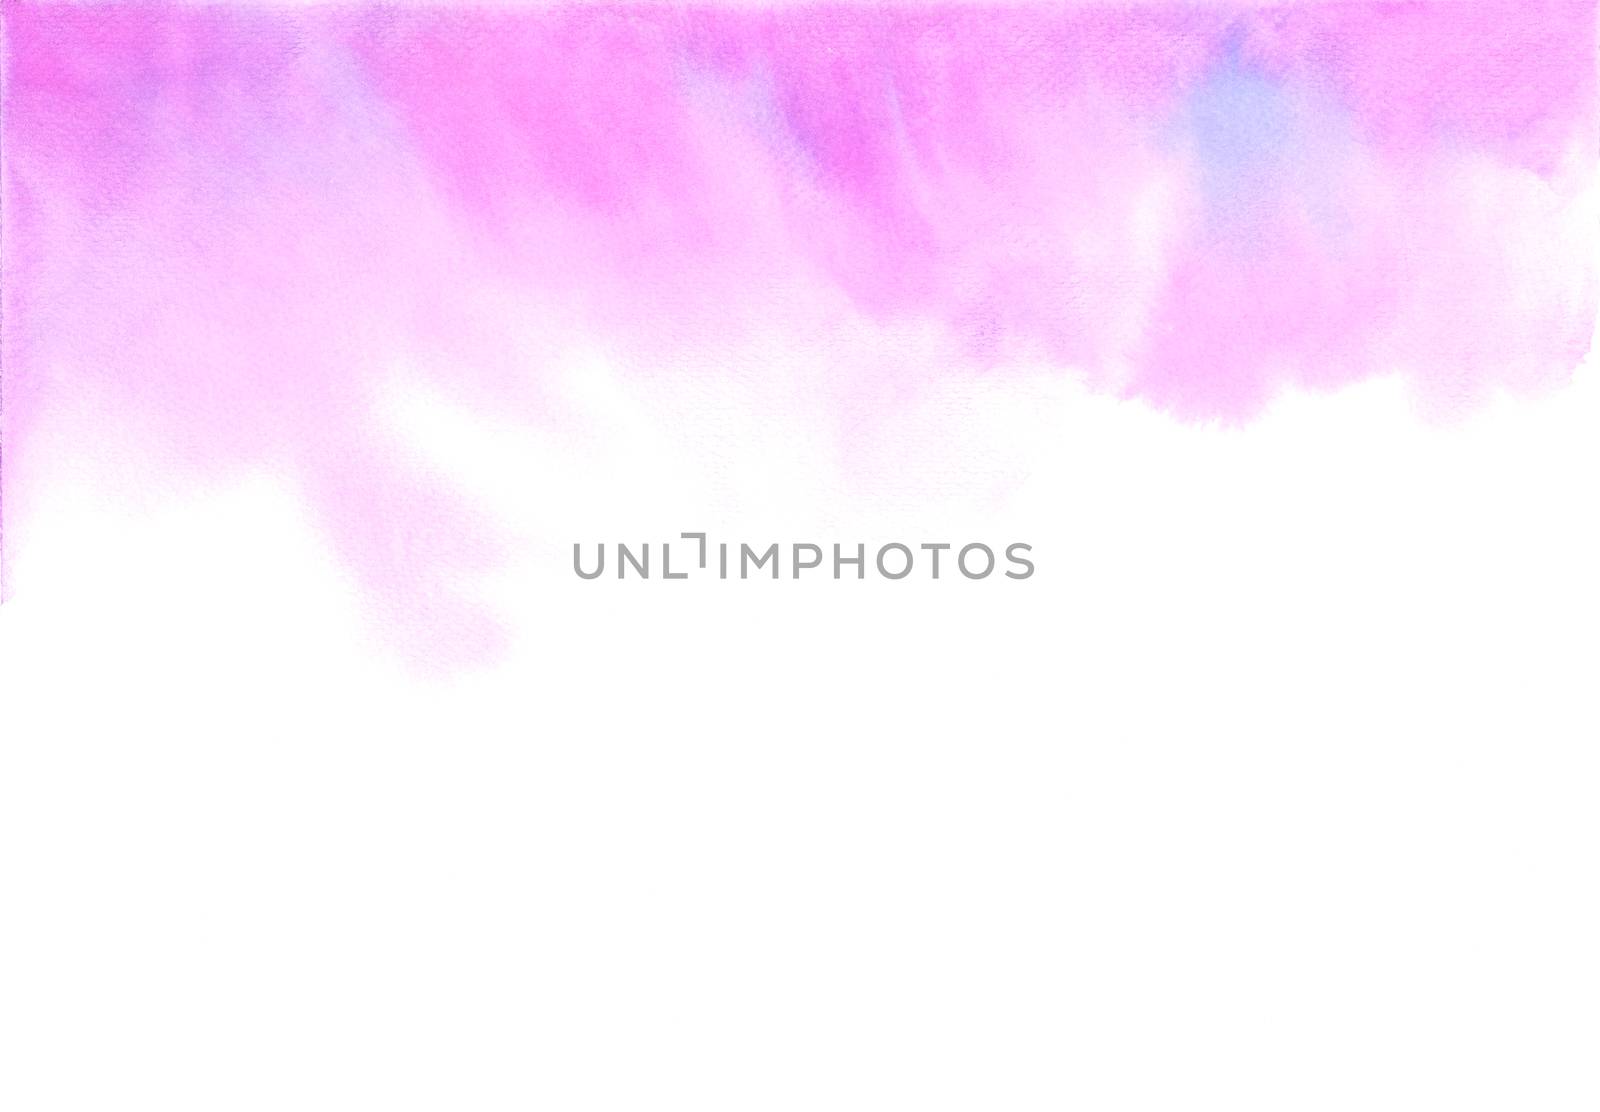 Romantic sweet charming pink-purple abstract background. Watercolor hand painting illustration. Design element for wallpaper, packaging, banner, poster, flyer.